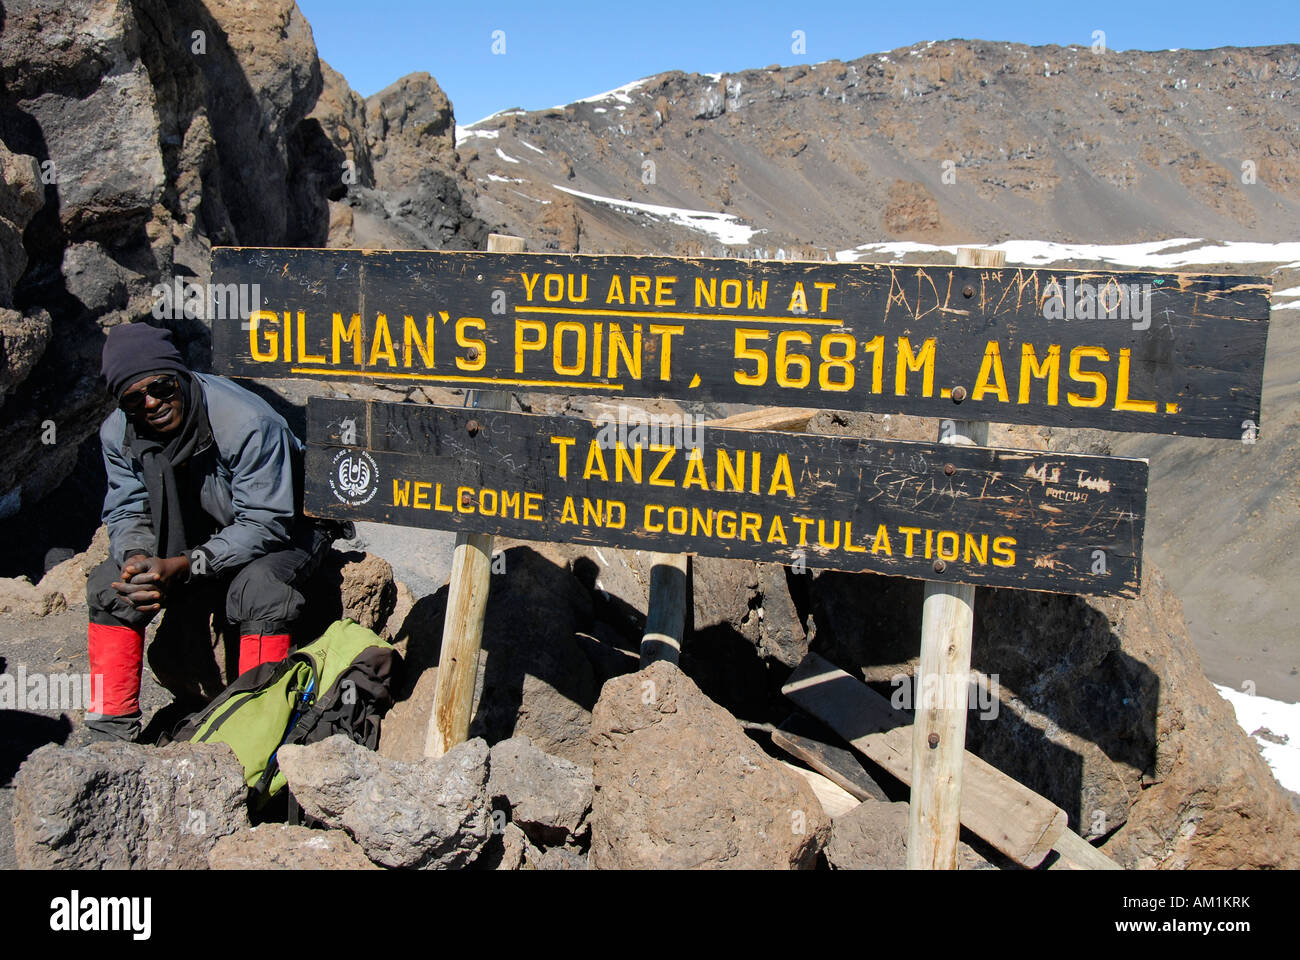 Local guide at the sign on the summit Gilman's Point (5681 m) crater rim Kilimanjaro Tanzania Stock Photo